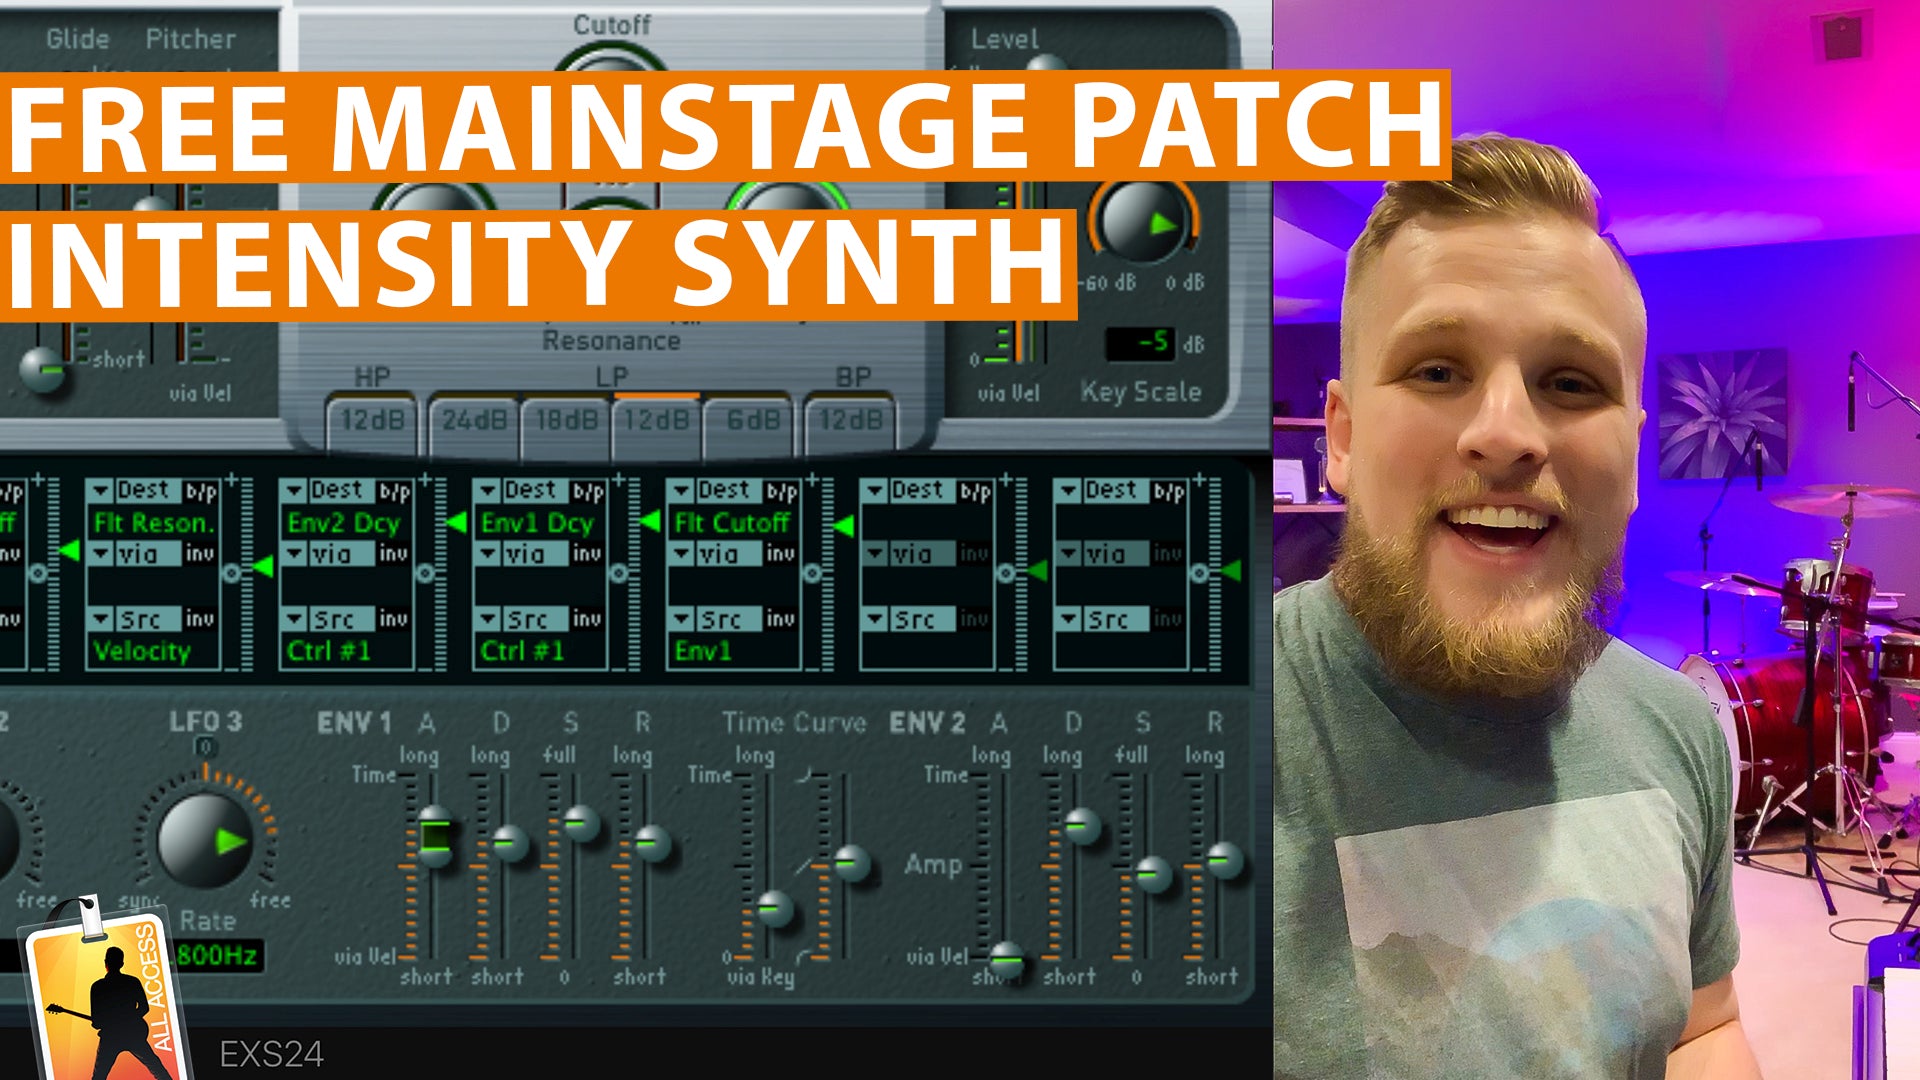 Free MainStage Worship Patch! - Intensity Synth Pad with Attack